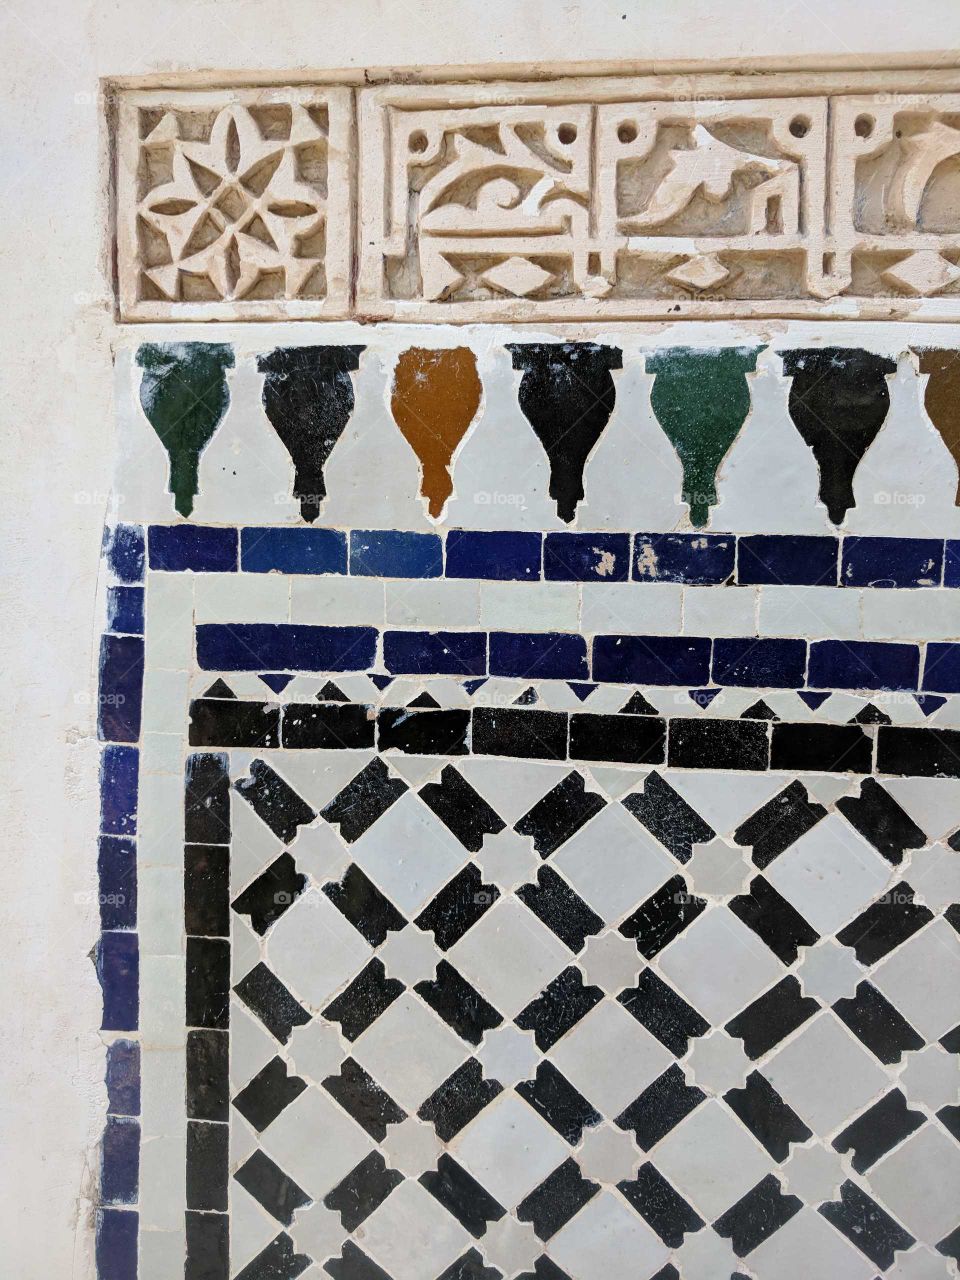 Close Up of Colorful Ceramic Tile Mosaic Wall/Floor Details in the Bahia Palace in Marrakech in Morocco